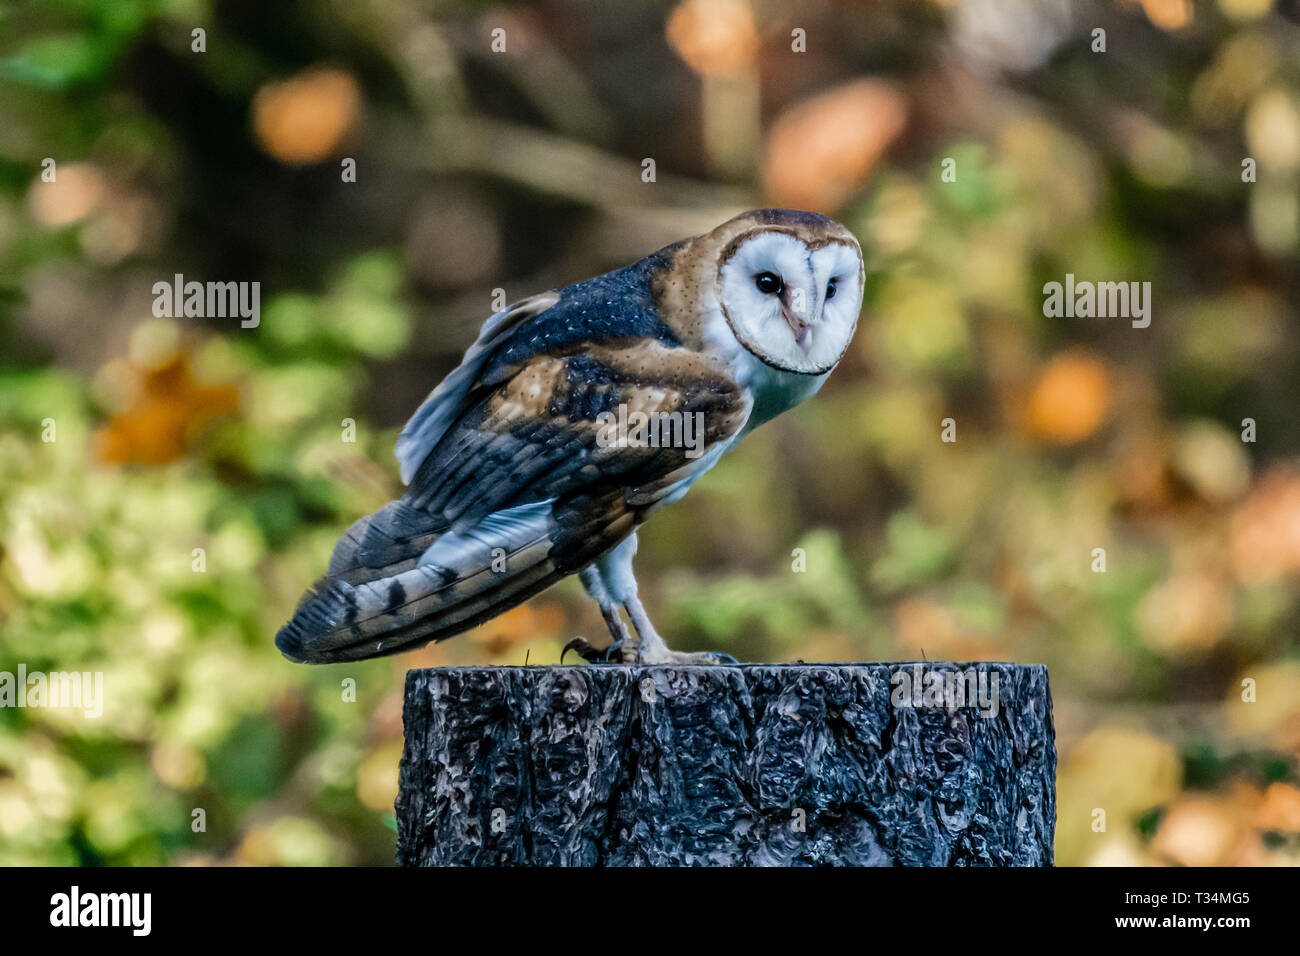 Barn Owl perched on a wooden post, British Columbia, Canada Stock Photo